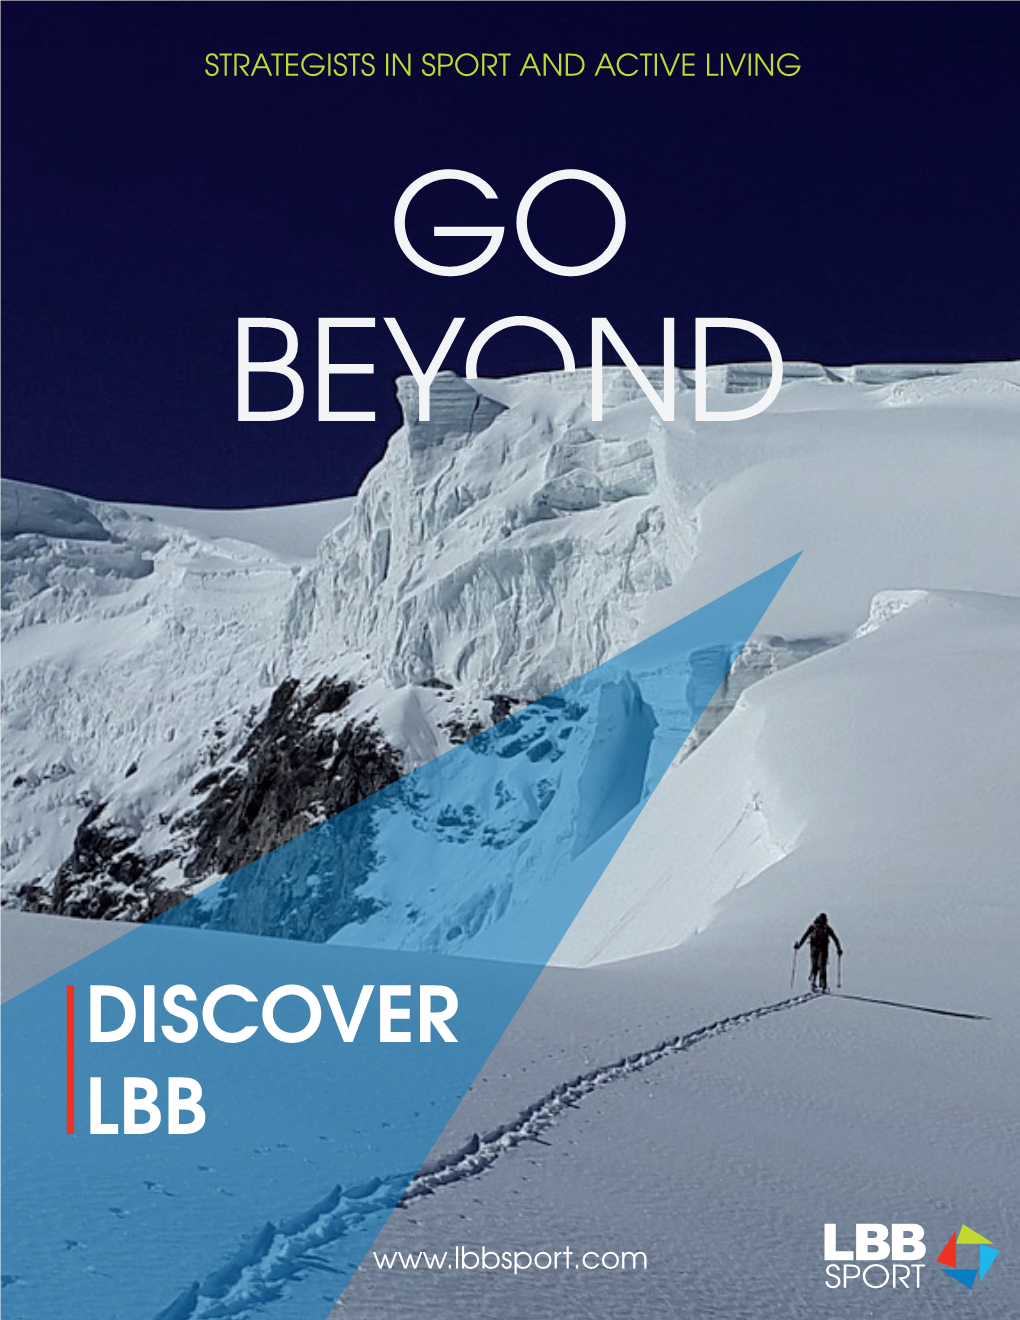 Discover Lbb